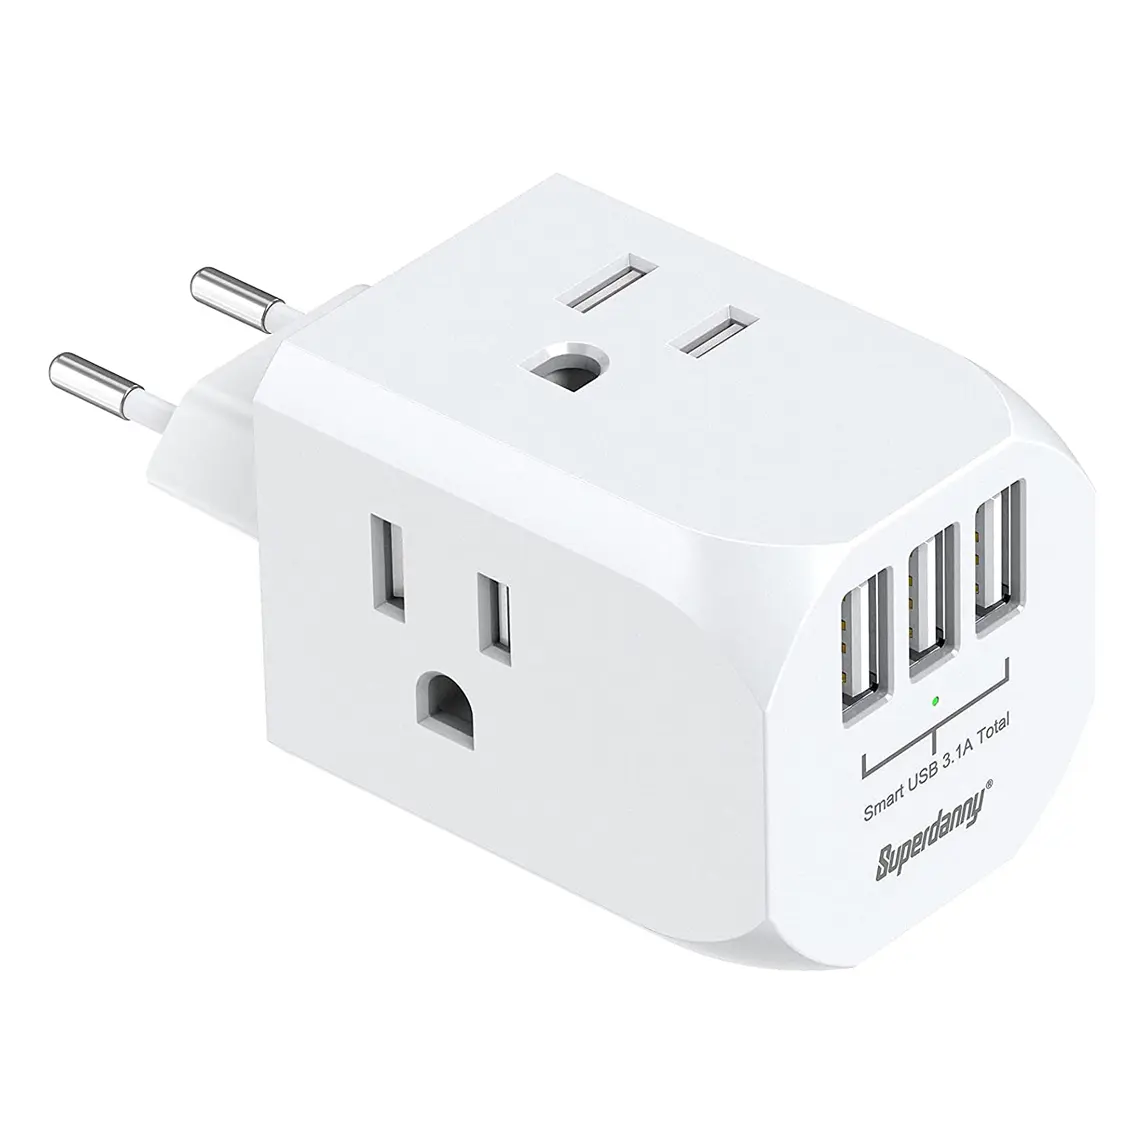 Superdanny free shipping universal travel adapter converter multi plug outlet extender with usb european travel plug adapter